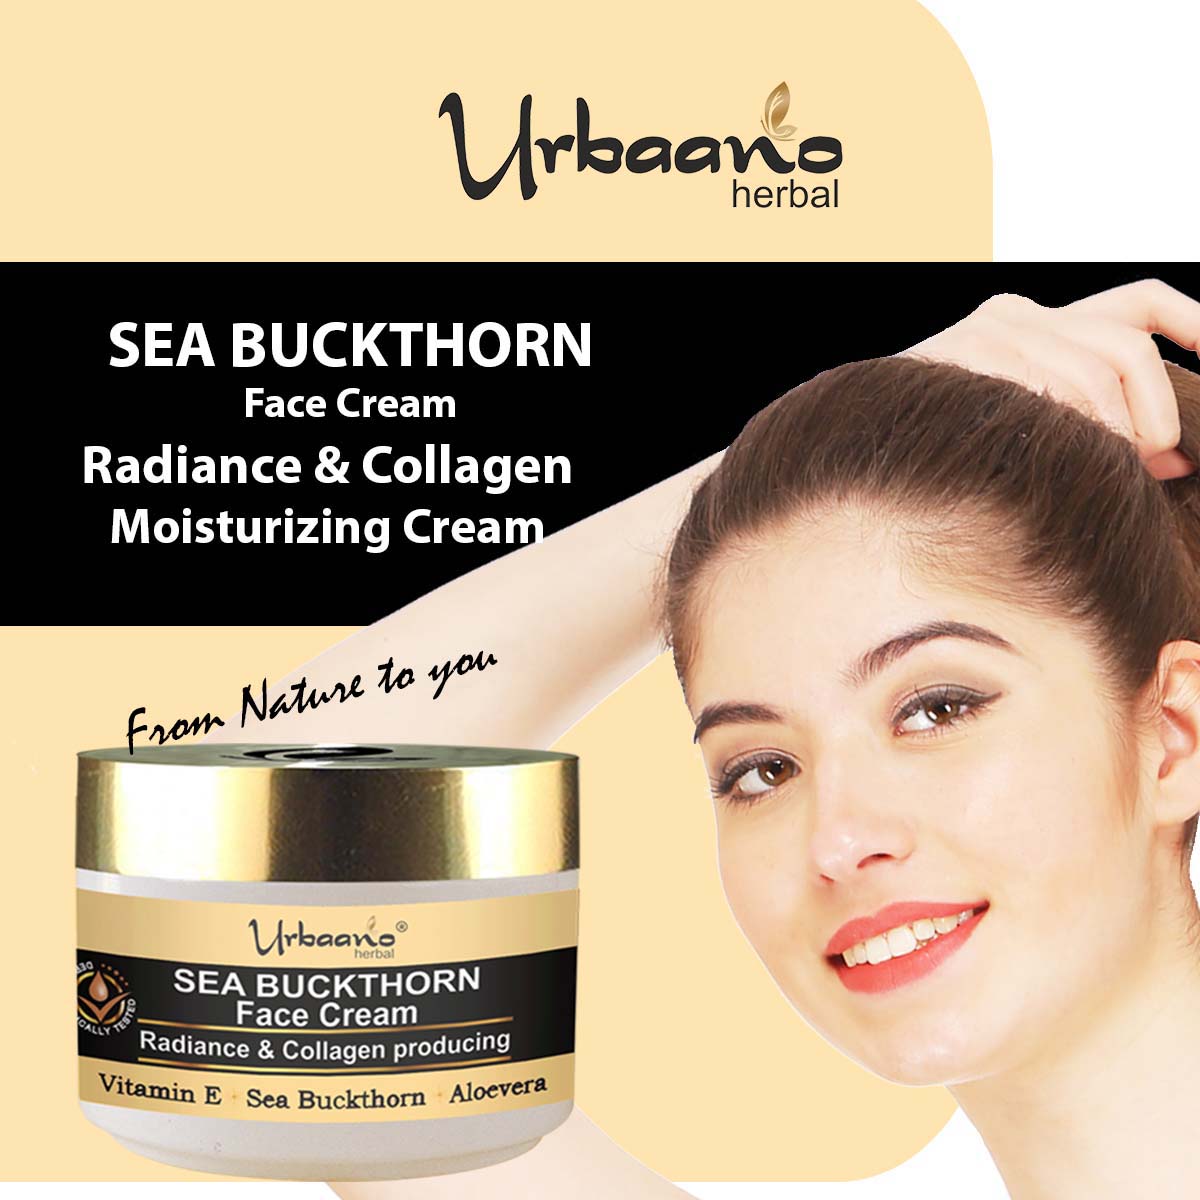 urbaano herbal sea buckthorn radiance & collagen boost face cream moisturizer for nature to you